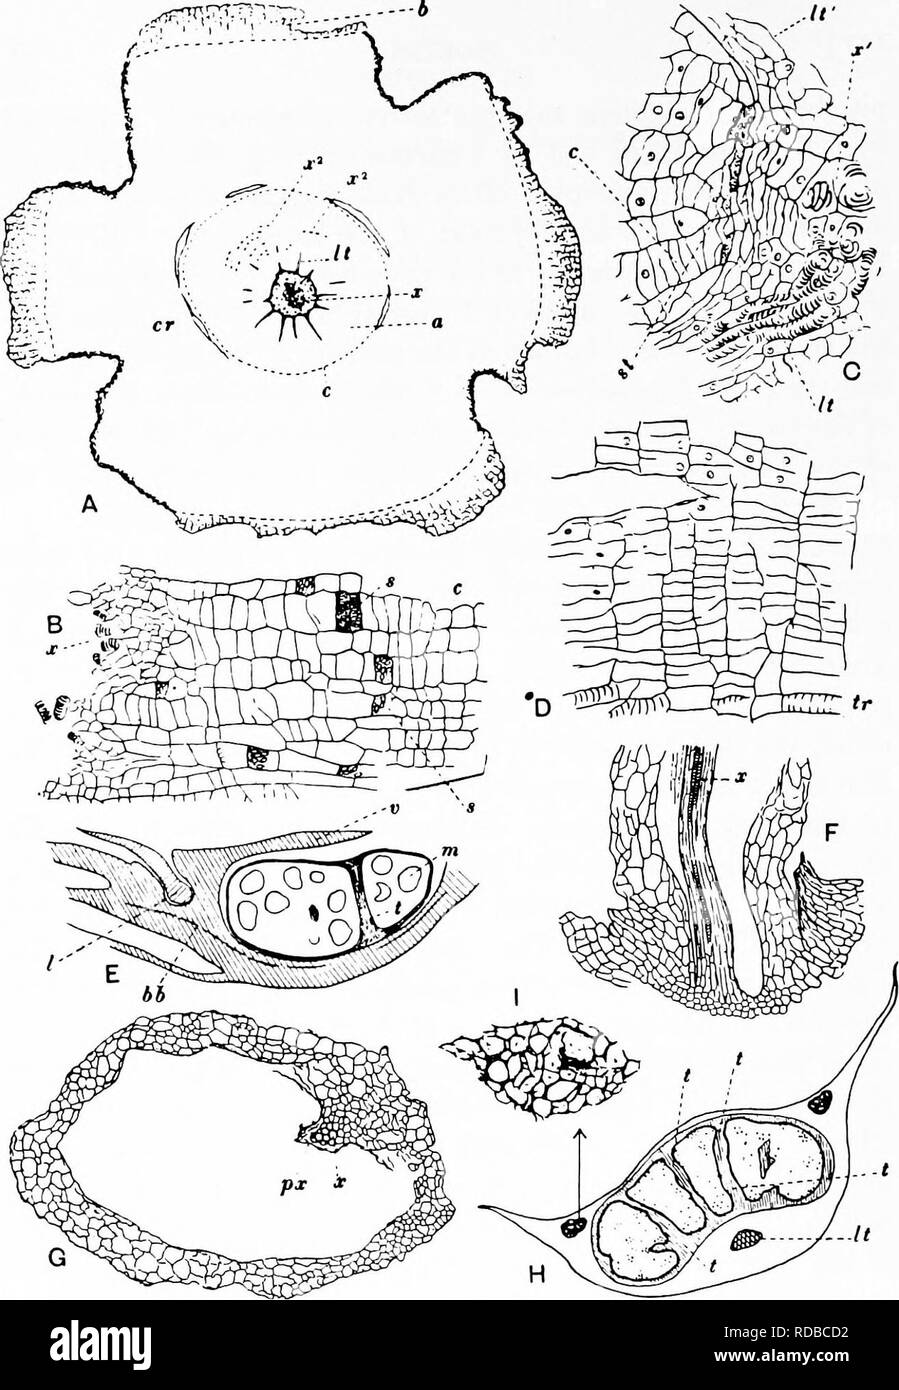 . Fossil plants : for students of botany and geology . Paleobotany. ,^^p?'^)-. FiQ. 133. Isoetes lacustris. A. Transverse section of stem: cr, cortex; x, i^ xylem; c, cambium; a, thin-walled tissue; It, leai-traces; 6, dead tissue. B, C, D. Portions of A enlarged. E. Longitudinal radial section of sporophyll-base: v, velum; I, ligule ; bb, vascular bundle; m, megaspores; t, sterile tissue. F. Longitudinal section through the base of a root. G. Transverse section of root. H. Transverse section of sporophyll, showing sporangium with trabeculae, t; leaf-trace, (iJ), and two groups of secretory c Stock Photo